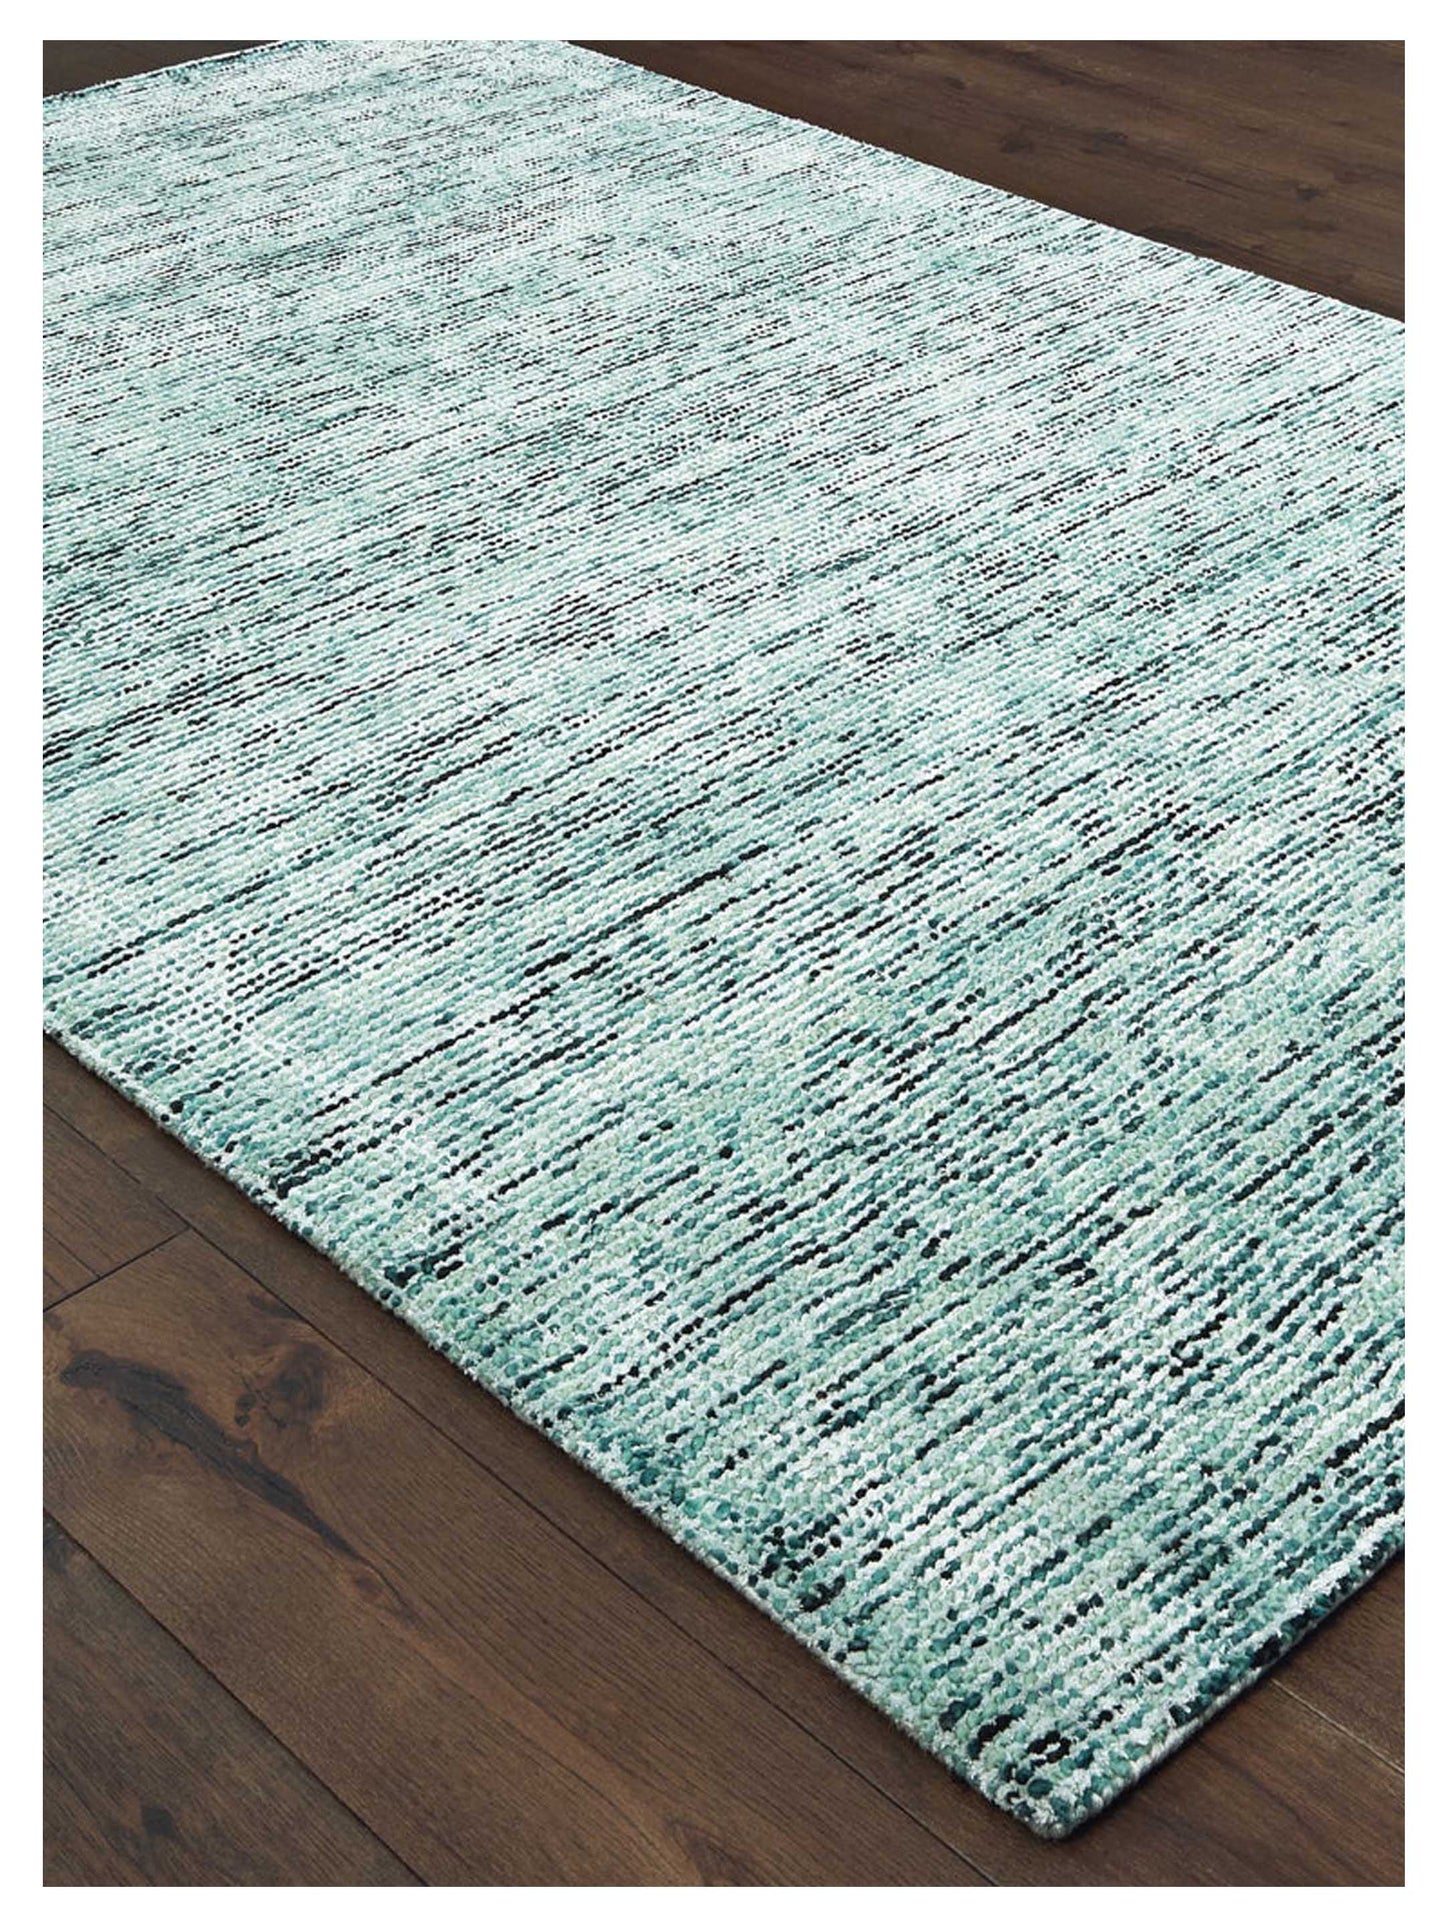 Oriental Weavers LUCENT 45901 Blue Teal Tommy Bahama Tufted Rug